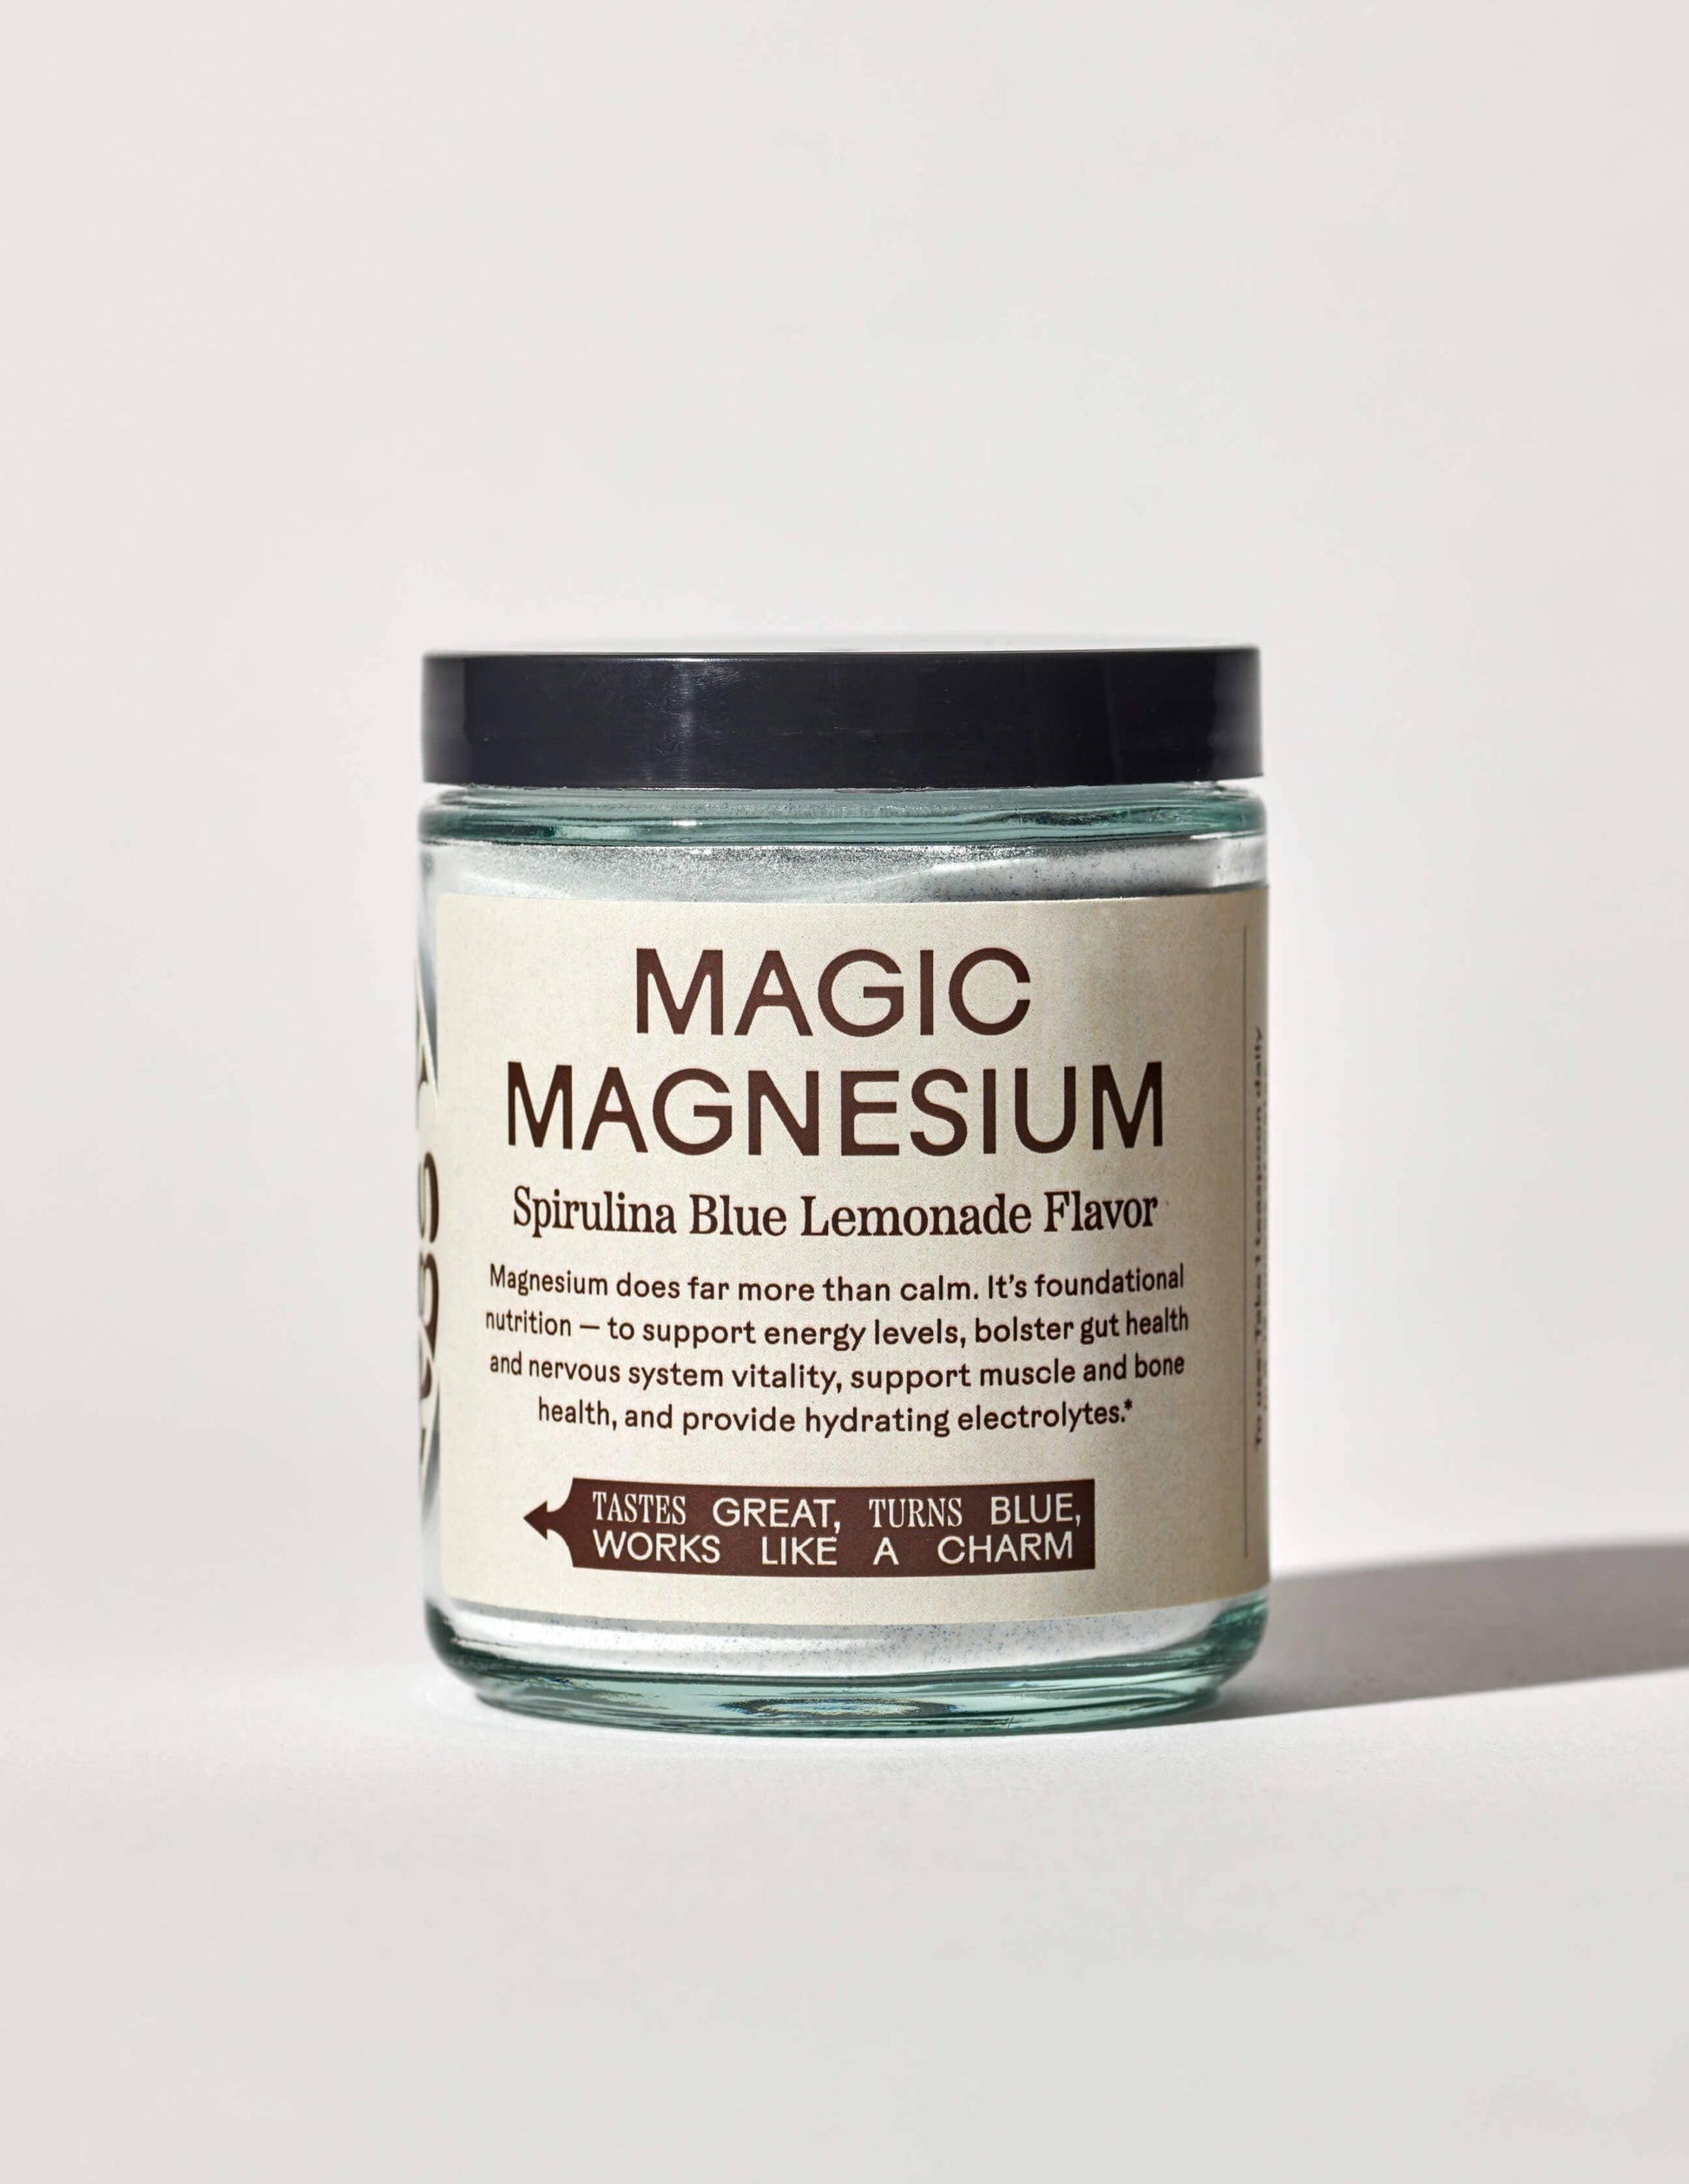 Magic Magnesium by Wooden Spoon Herbs - Haven